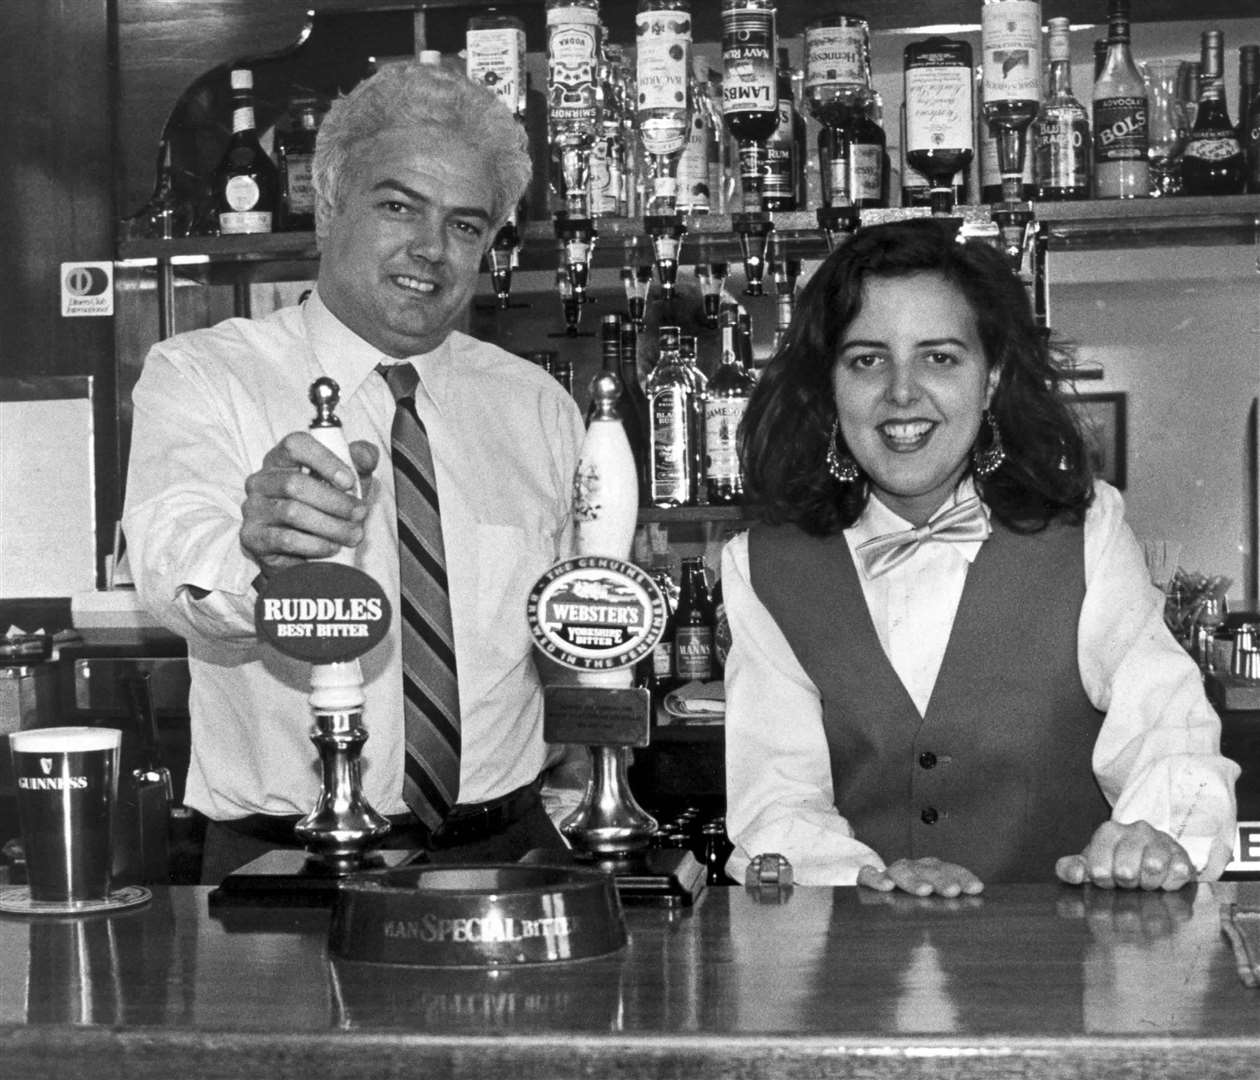 Does anyone remember the names of these two behind the bar of Three Daws Pub in Gravesend in September 1988? Please comment below.